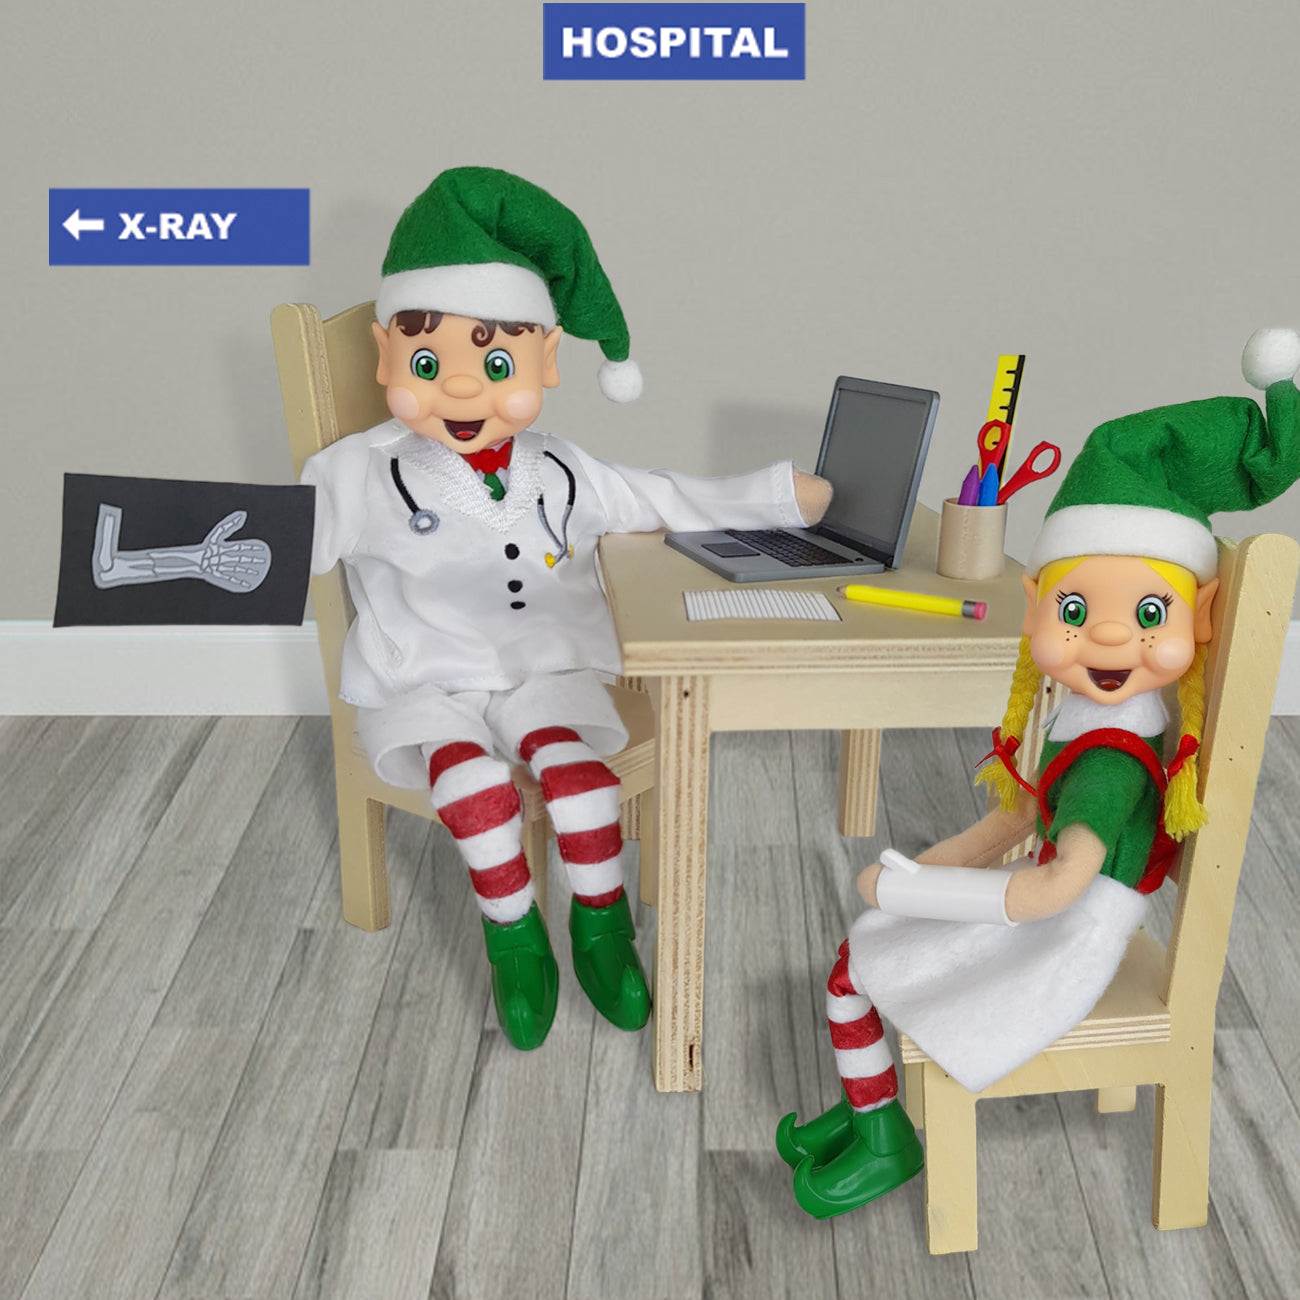 Broken arm scene, With a elf dressed as a doctor tending to a blonde hair elf with a broken arm. He has a elf sized laptop and pencils on his desk